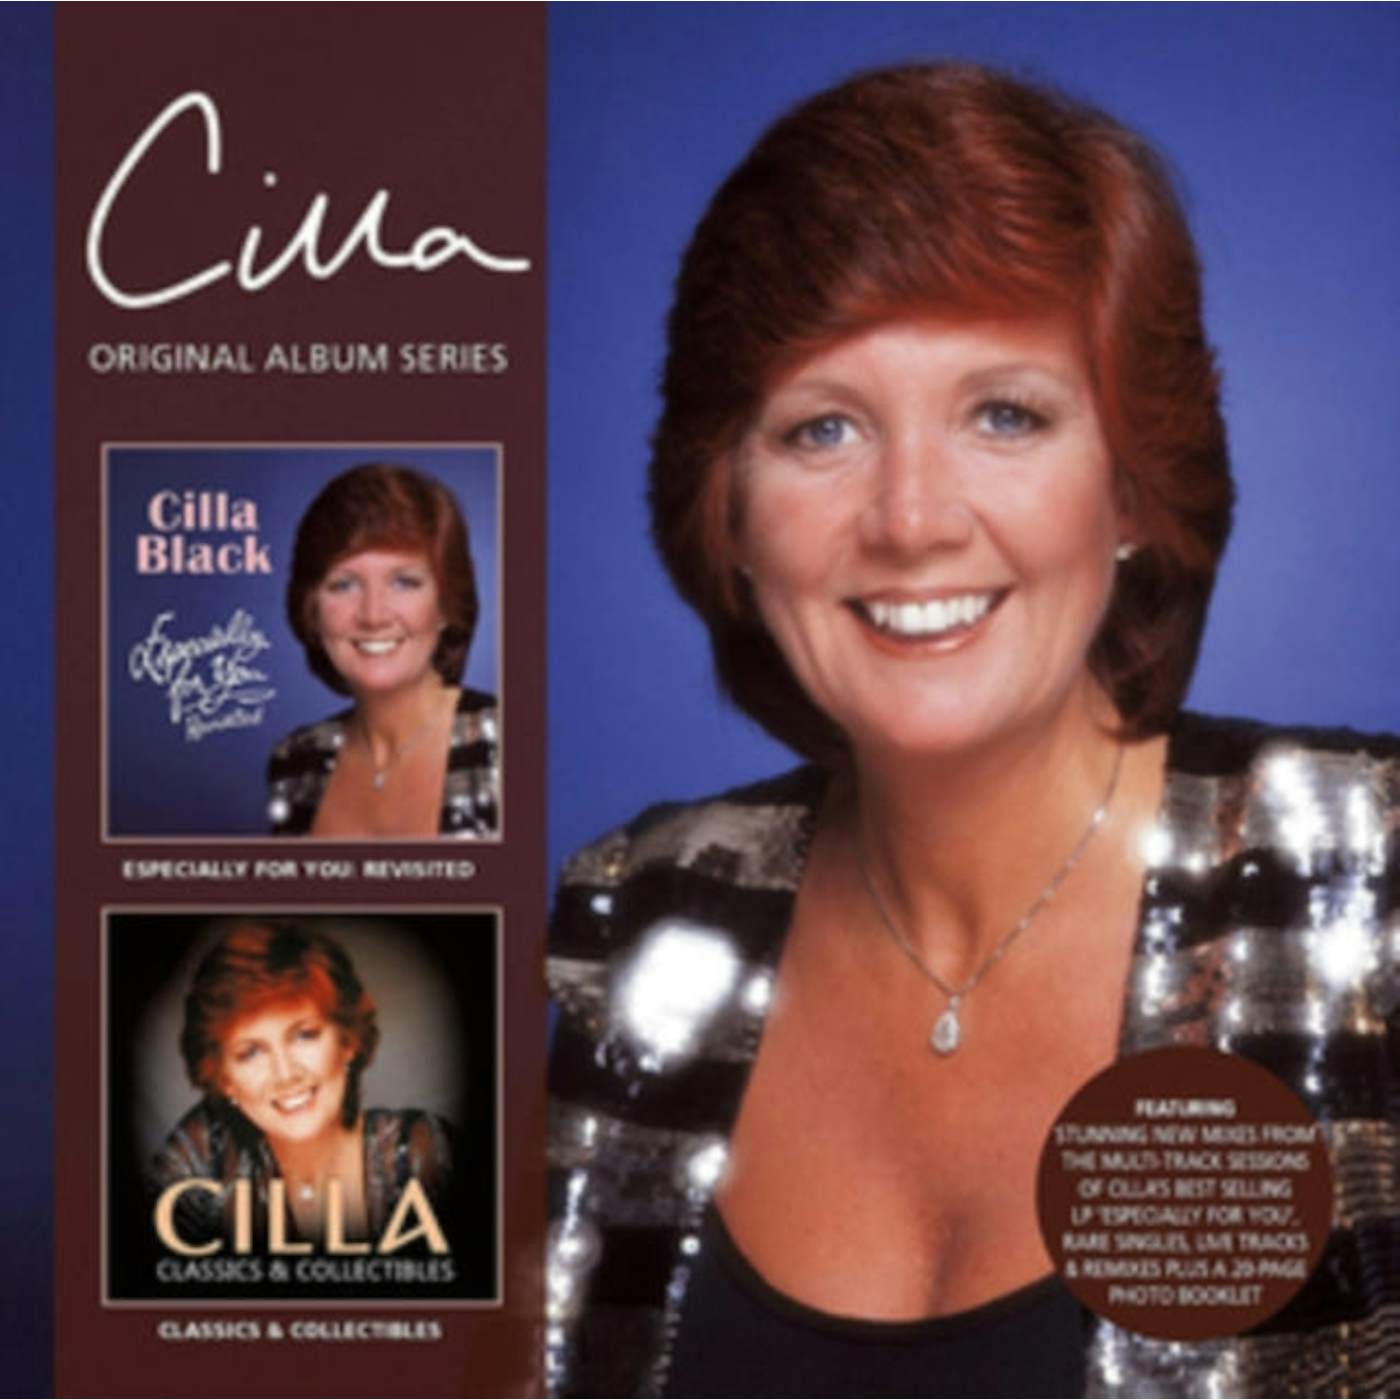 Cilla Black CD - Especially For You: Revisited / Classics & Collectibles